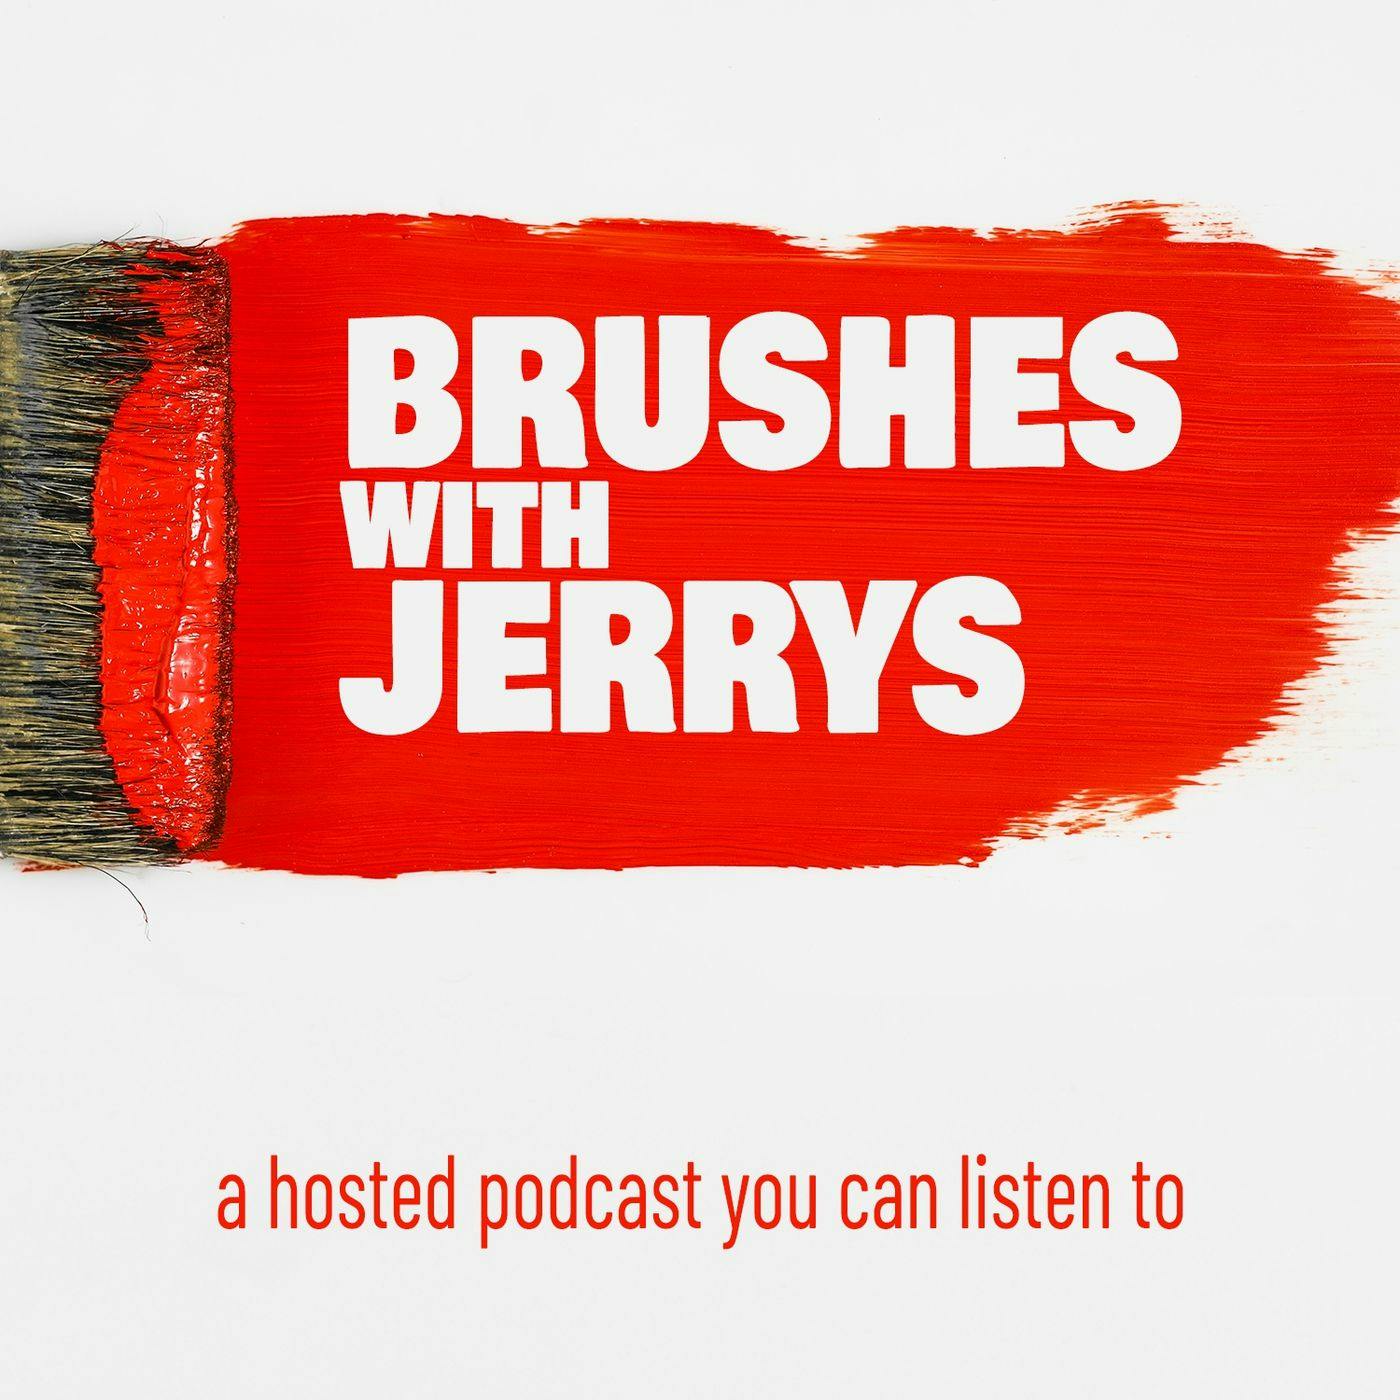 This is episode 5 of Brushes with Jerrys